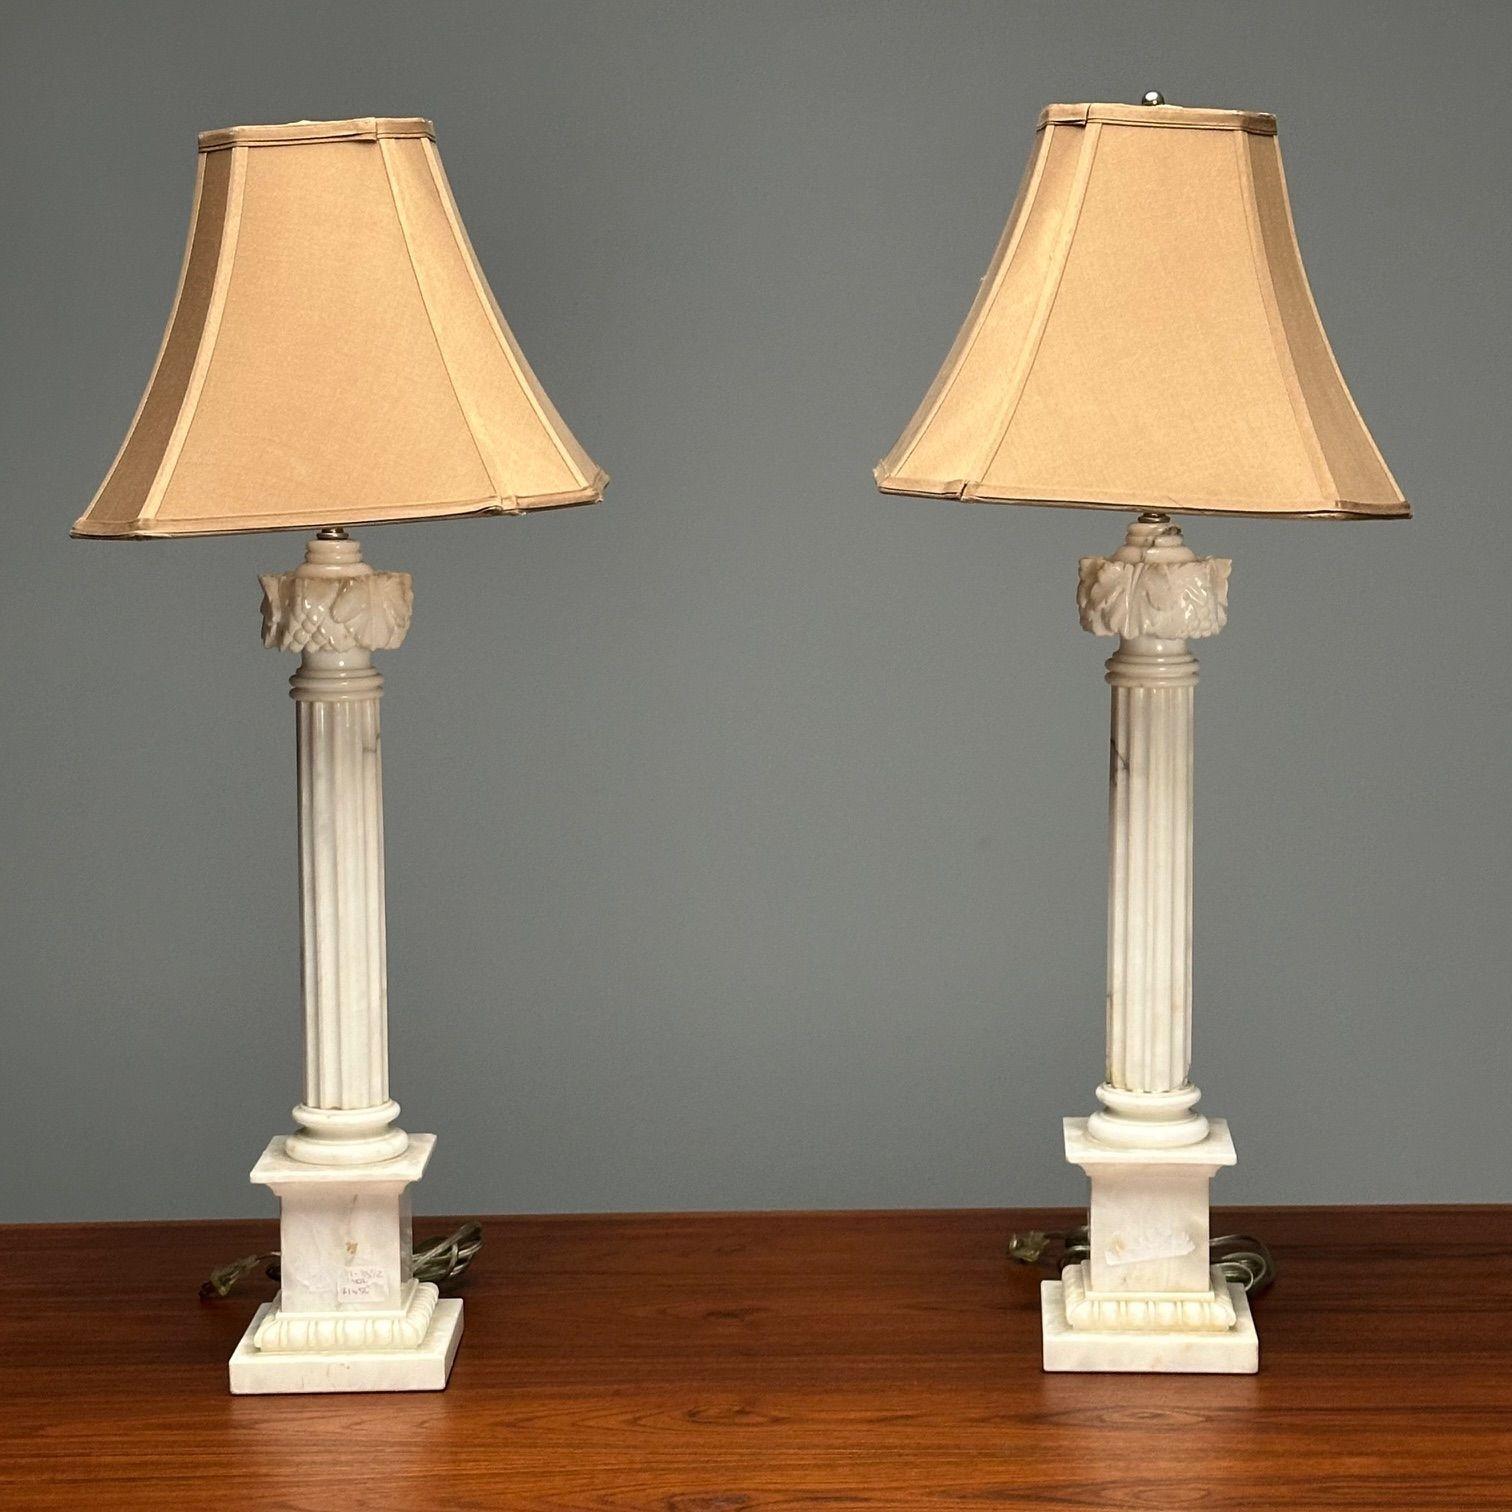 20th Century Italian Neoclassical, Column Motif Table Lamps, Marble, Italy, 1950s For Sale